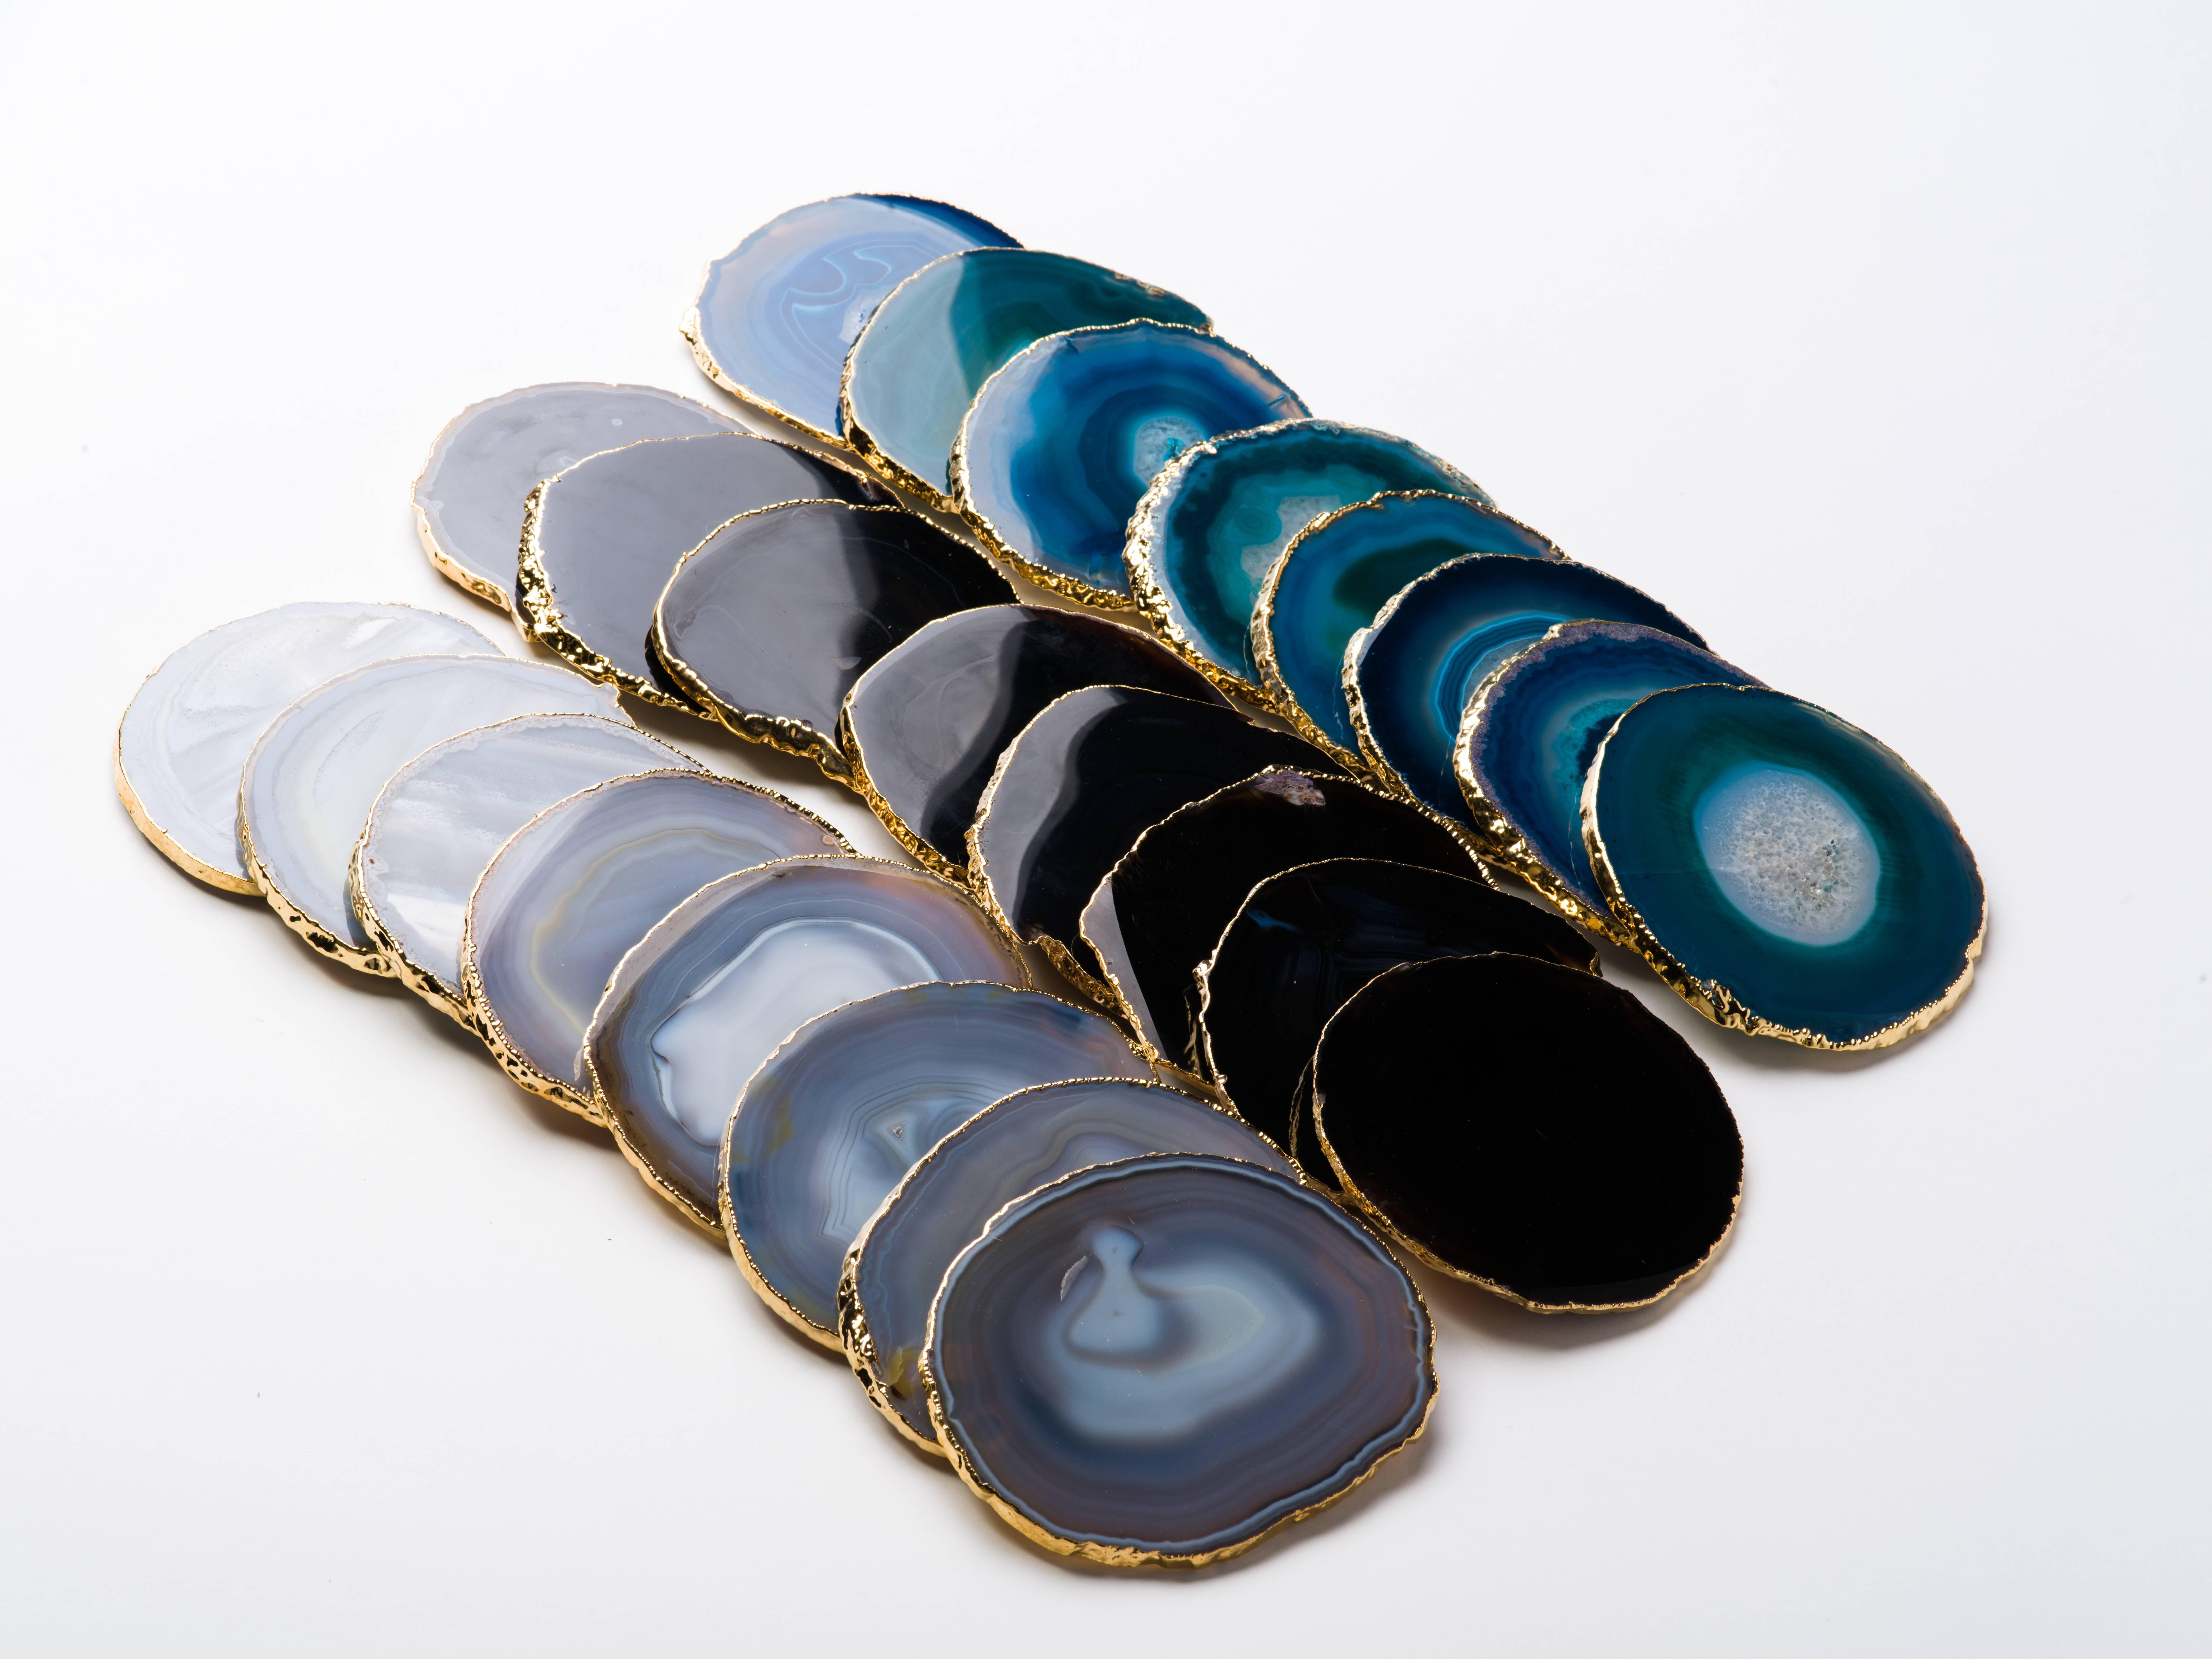 Set of Eight Semi-Precious Gemstone Coasters in Teal Wrapped in 24-Karat Gold 2